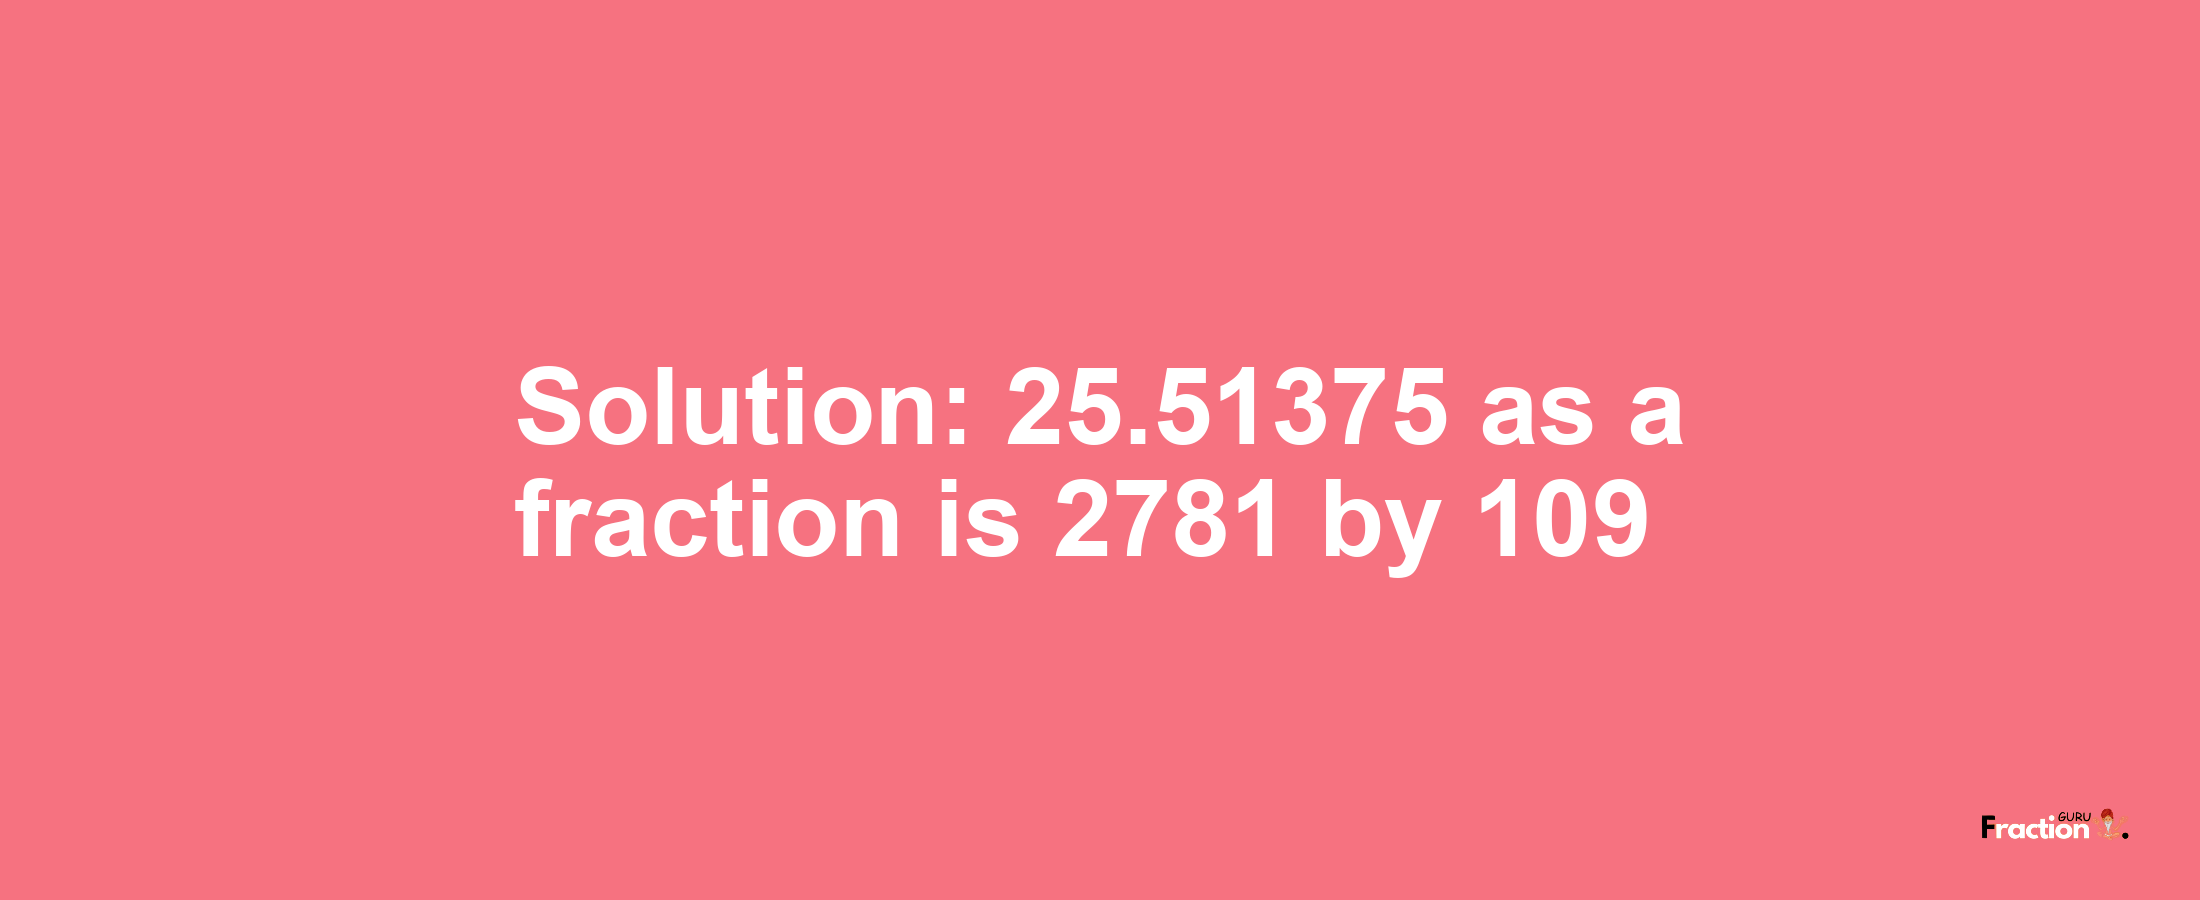 Solution:25.51375 as a fraction is 2781/109